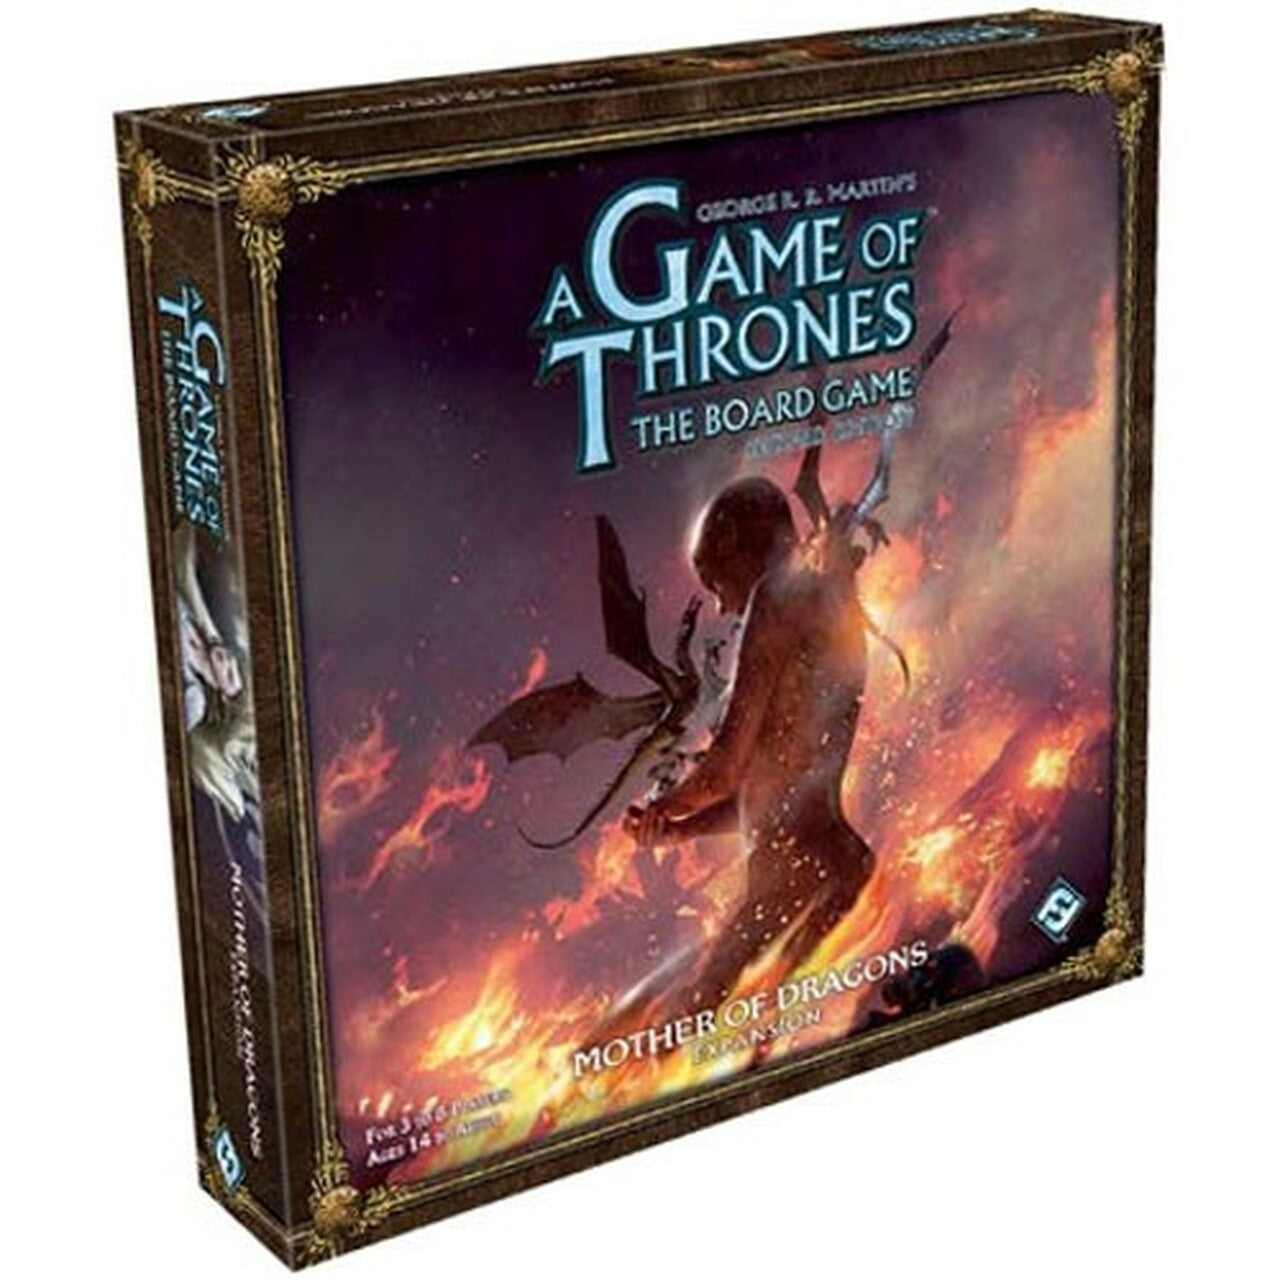 A GAME OF THRONES BOARD GAME 2ND EDITION: MOTHER OF DRAGONS EXPANSION | Grognard Games